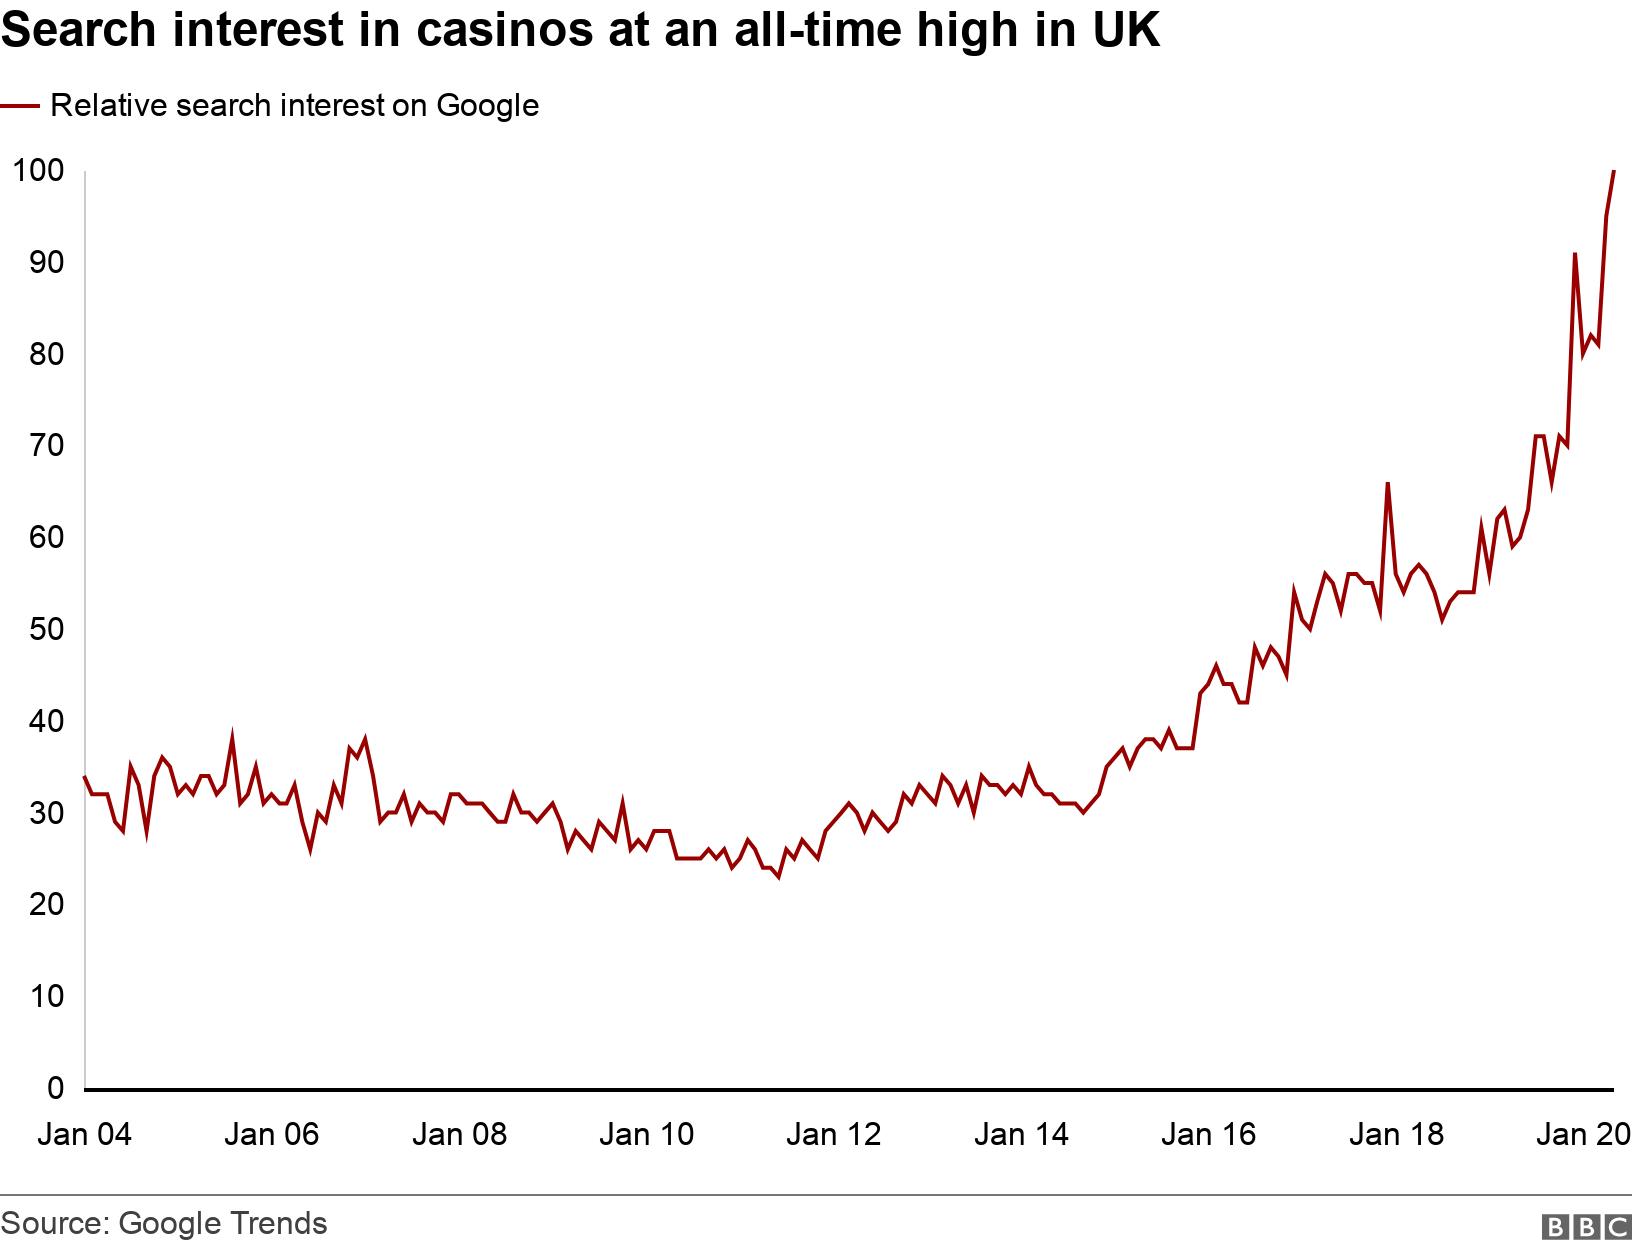 Search interest in casinos at an all-time high in UK. . A line chart showing the relative popularity of casinos and related topics in Google searches has reached an all-time high for the UK since the search engine's records began in 2004. .